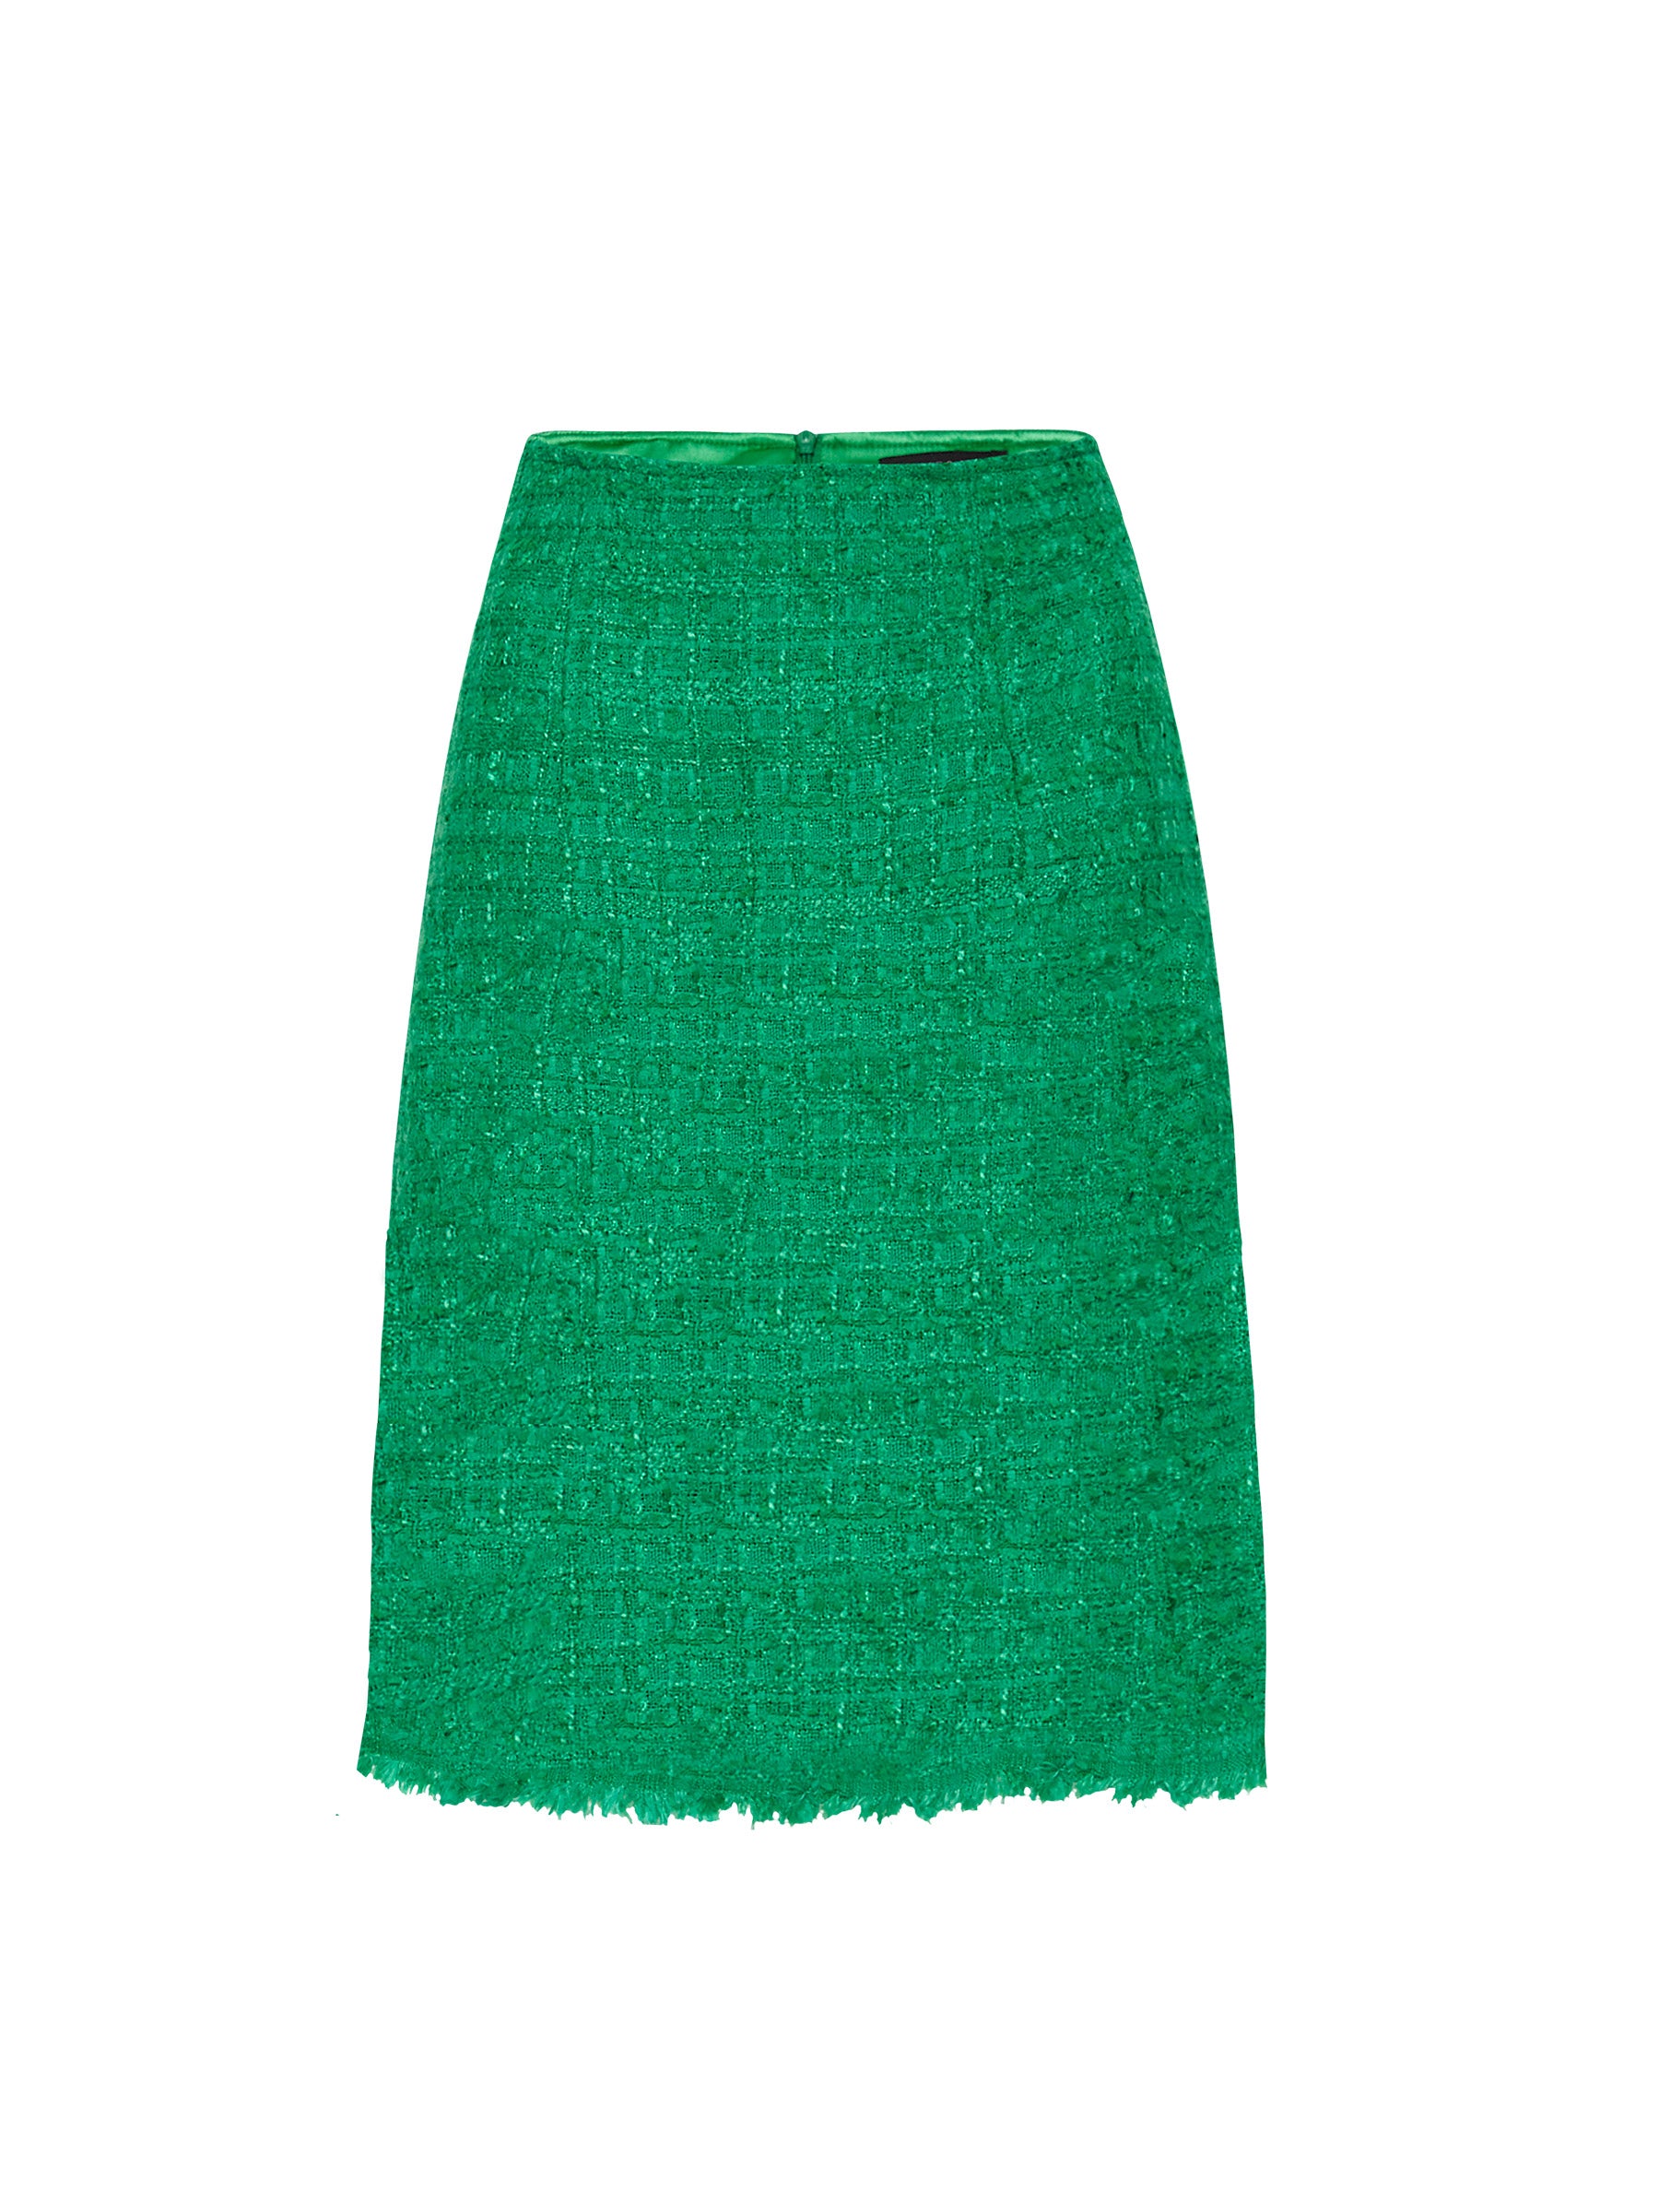 Jackie Skirt - Emerald (Size 16 Only)